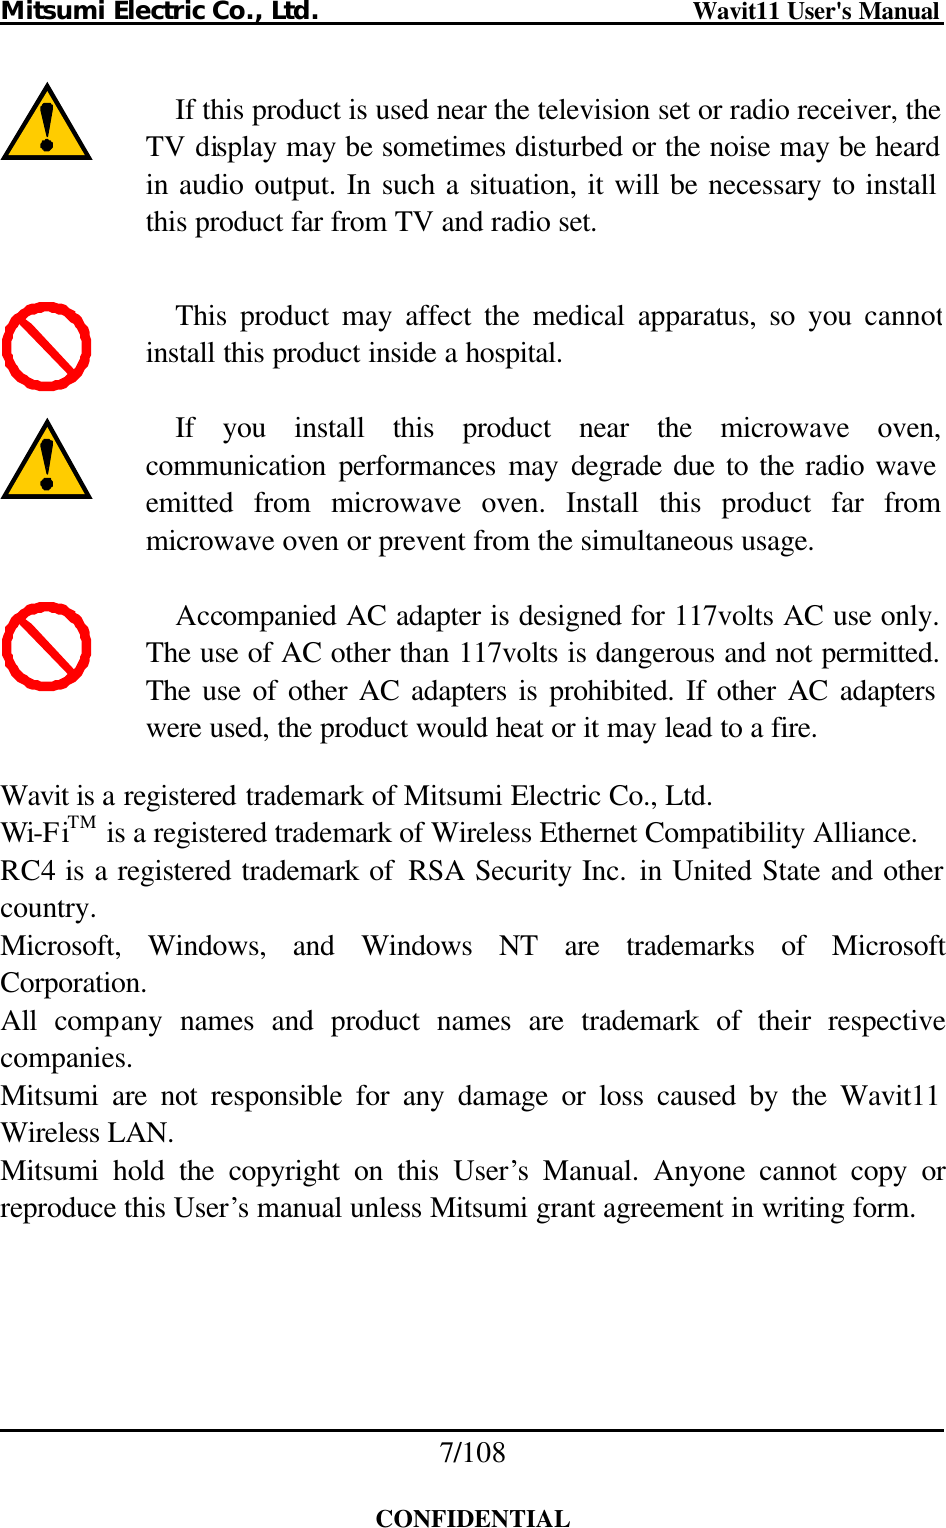 Mitsumi Electric Co., Ltd.                              Wavit11 User&apos;s Manual 7/108  CONFIDENTIAL             Wavit is a registered trademark of Mitsumi Electric Co., Ltd. Wi-FiTM is a registered trademark of Wireless Ethernet Compatibility Alliance. RC4 is a registered trademark of  RSA Security Inc. in United State and other country. Microsoft, Windows, and Windows NT are trademarks of Microsoft Corporation. All company names and product names are trademark of their respective companies. Mitsumi are not responsible for any damage or loss caused by the Wavit11 Wireless LAN. Mitsumi hold the copyright on this User’s Manual. Anyone cannot copy or reproduce this User’s manual unless Mitsumi grant agreement in writing form. If this product is used near the television set or radio receiver, the TV display may be sometimes disturbed or the noise may be heard in audio output. In such a situation, it will be necessary to install this product far from TV and radio set. This product may affect the medical apparatus, so you cannotinstall this product inside a hospital. If you install this product near the microwave oven, communication performances may degrade due to the radio wave emitted from microwave oven. Install this product far from microwave oven or prevent from the simultaneous usage. Accompanied AC adapter is designed for 117volts AC use only. The use of AC other than 117volts is dangerous and not permitted. The use of other AC adapters is prohibited. If other AC adapters were used, the product would heat or it may lead to a fire. 